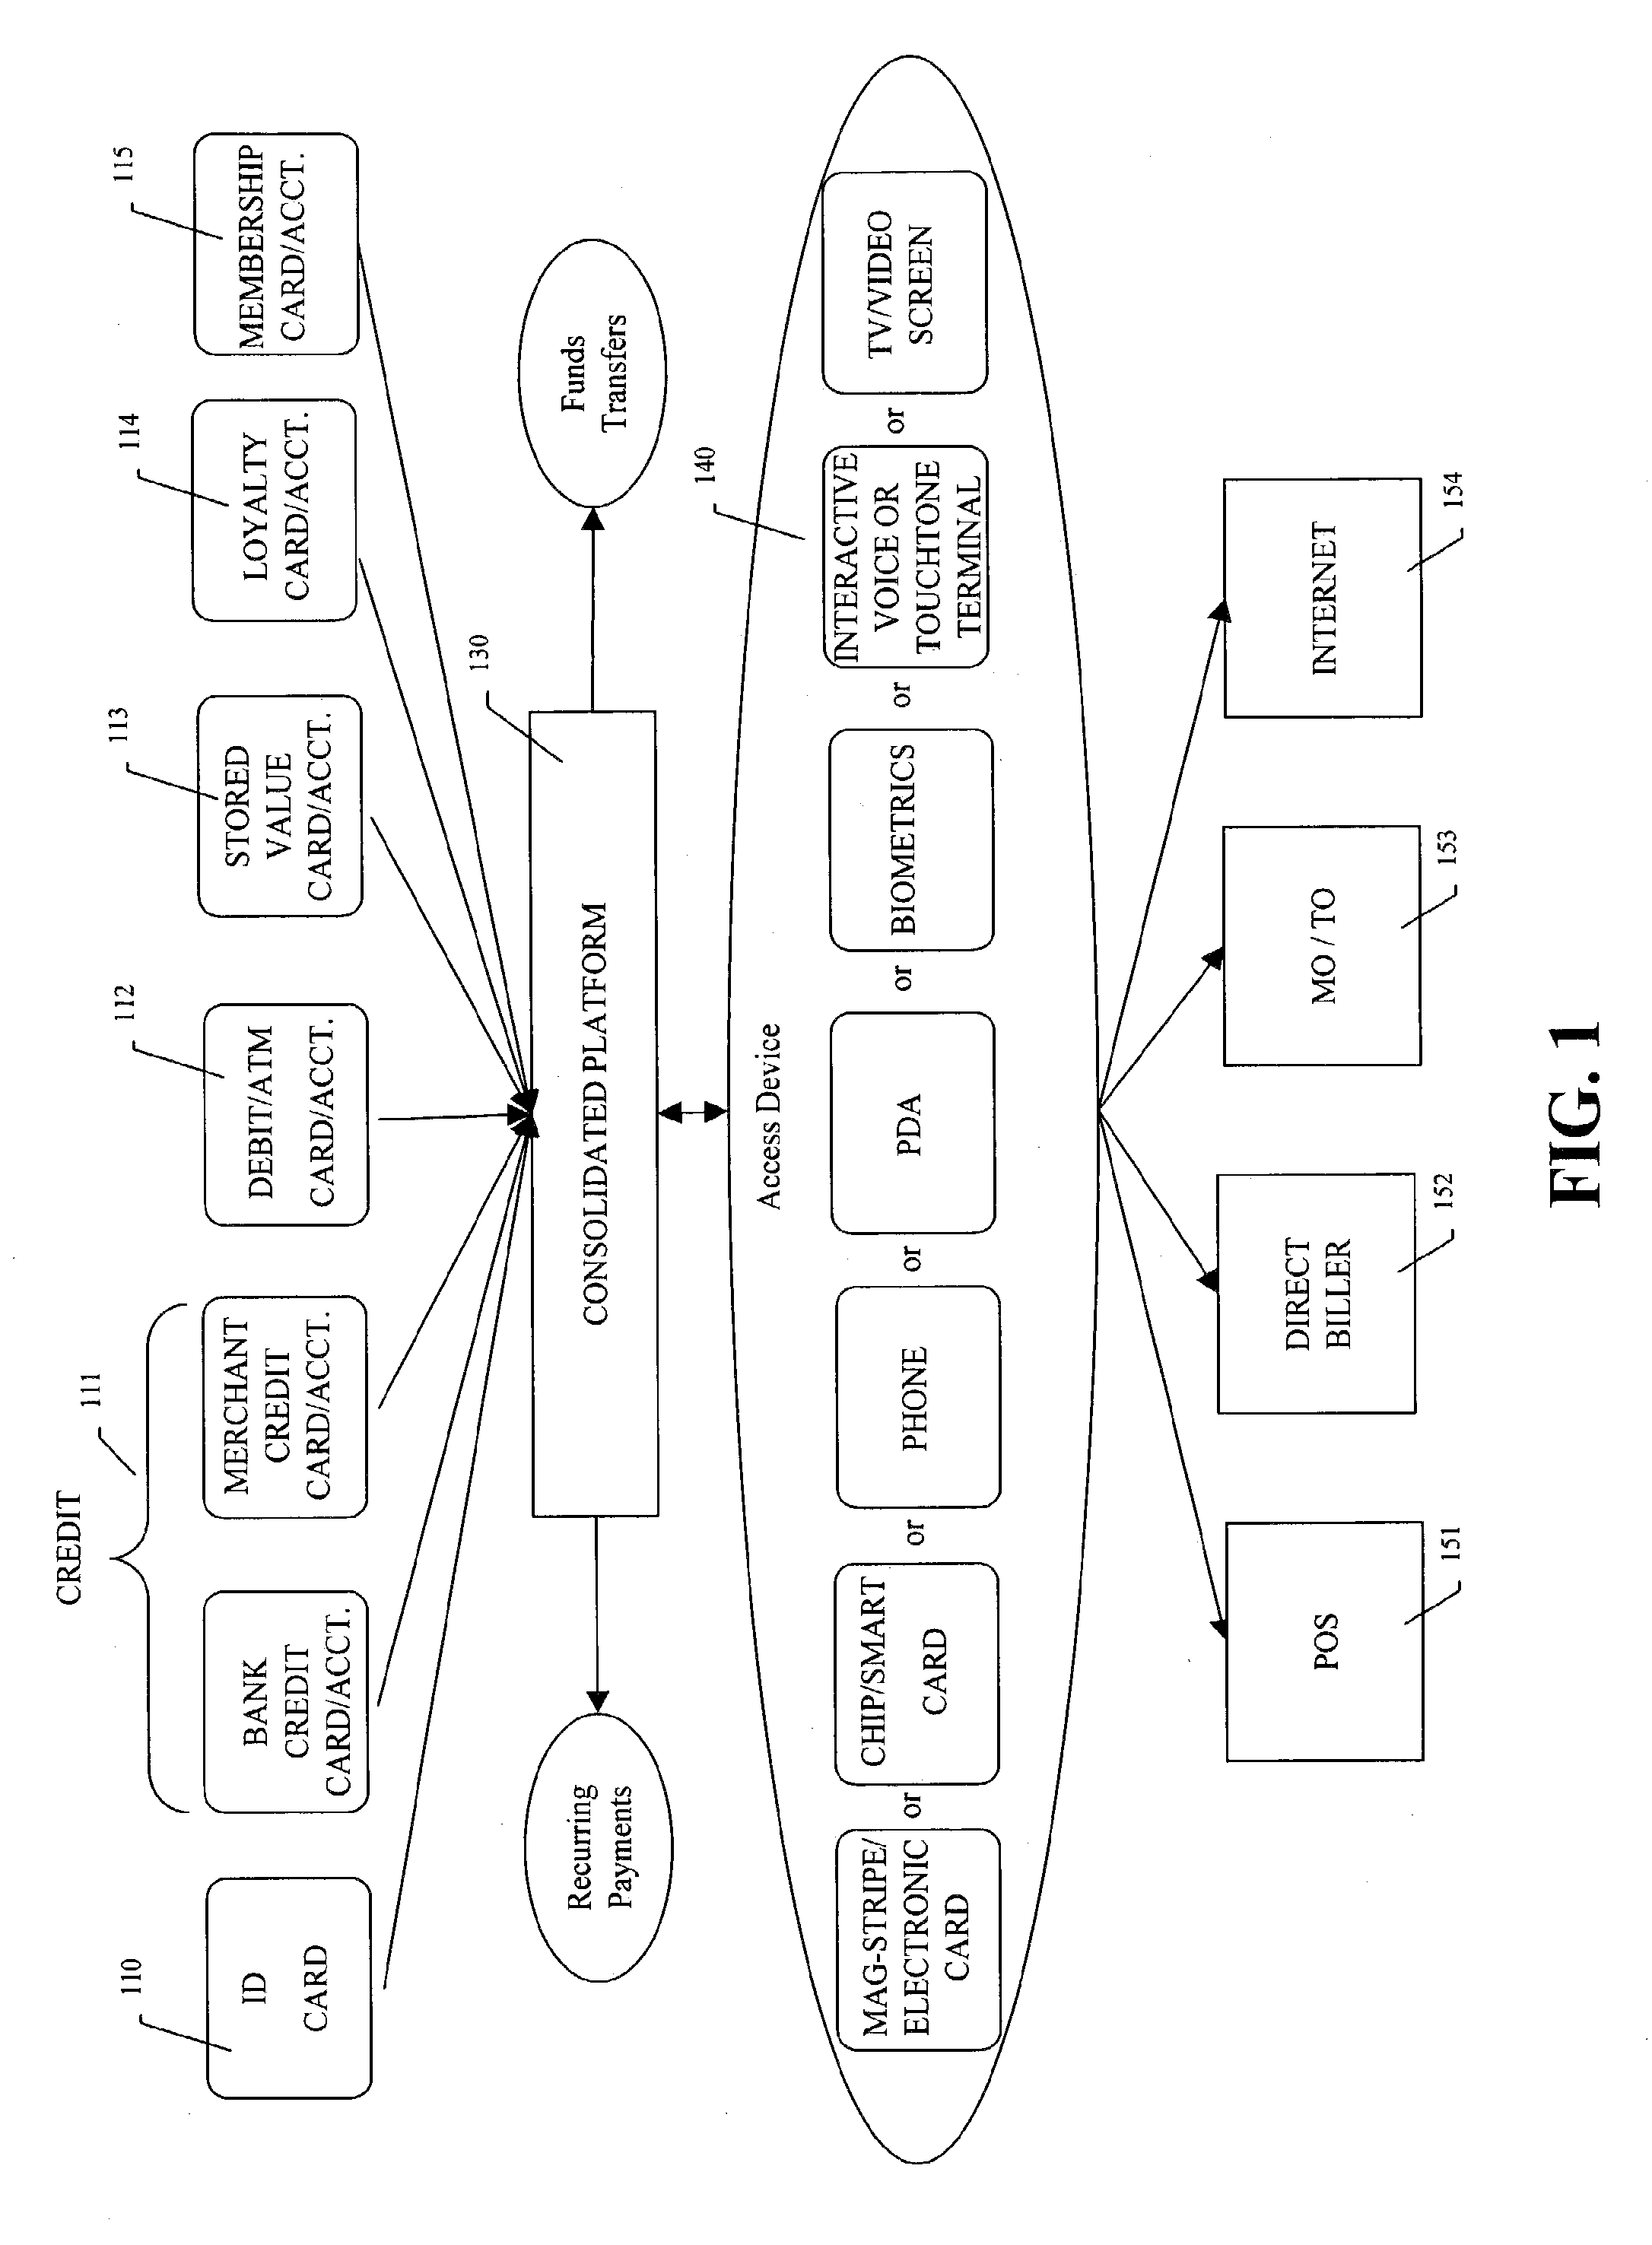 Method and System for a Multi-Purpose Transactional Platform